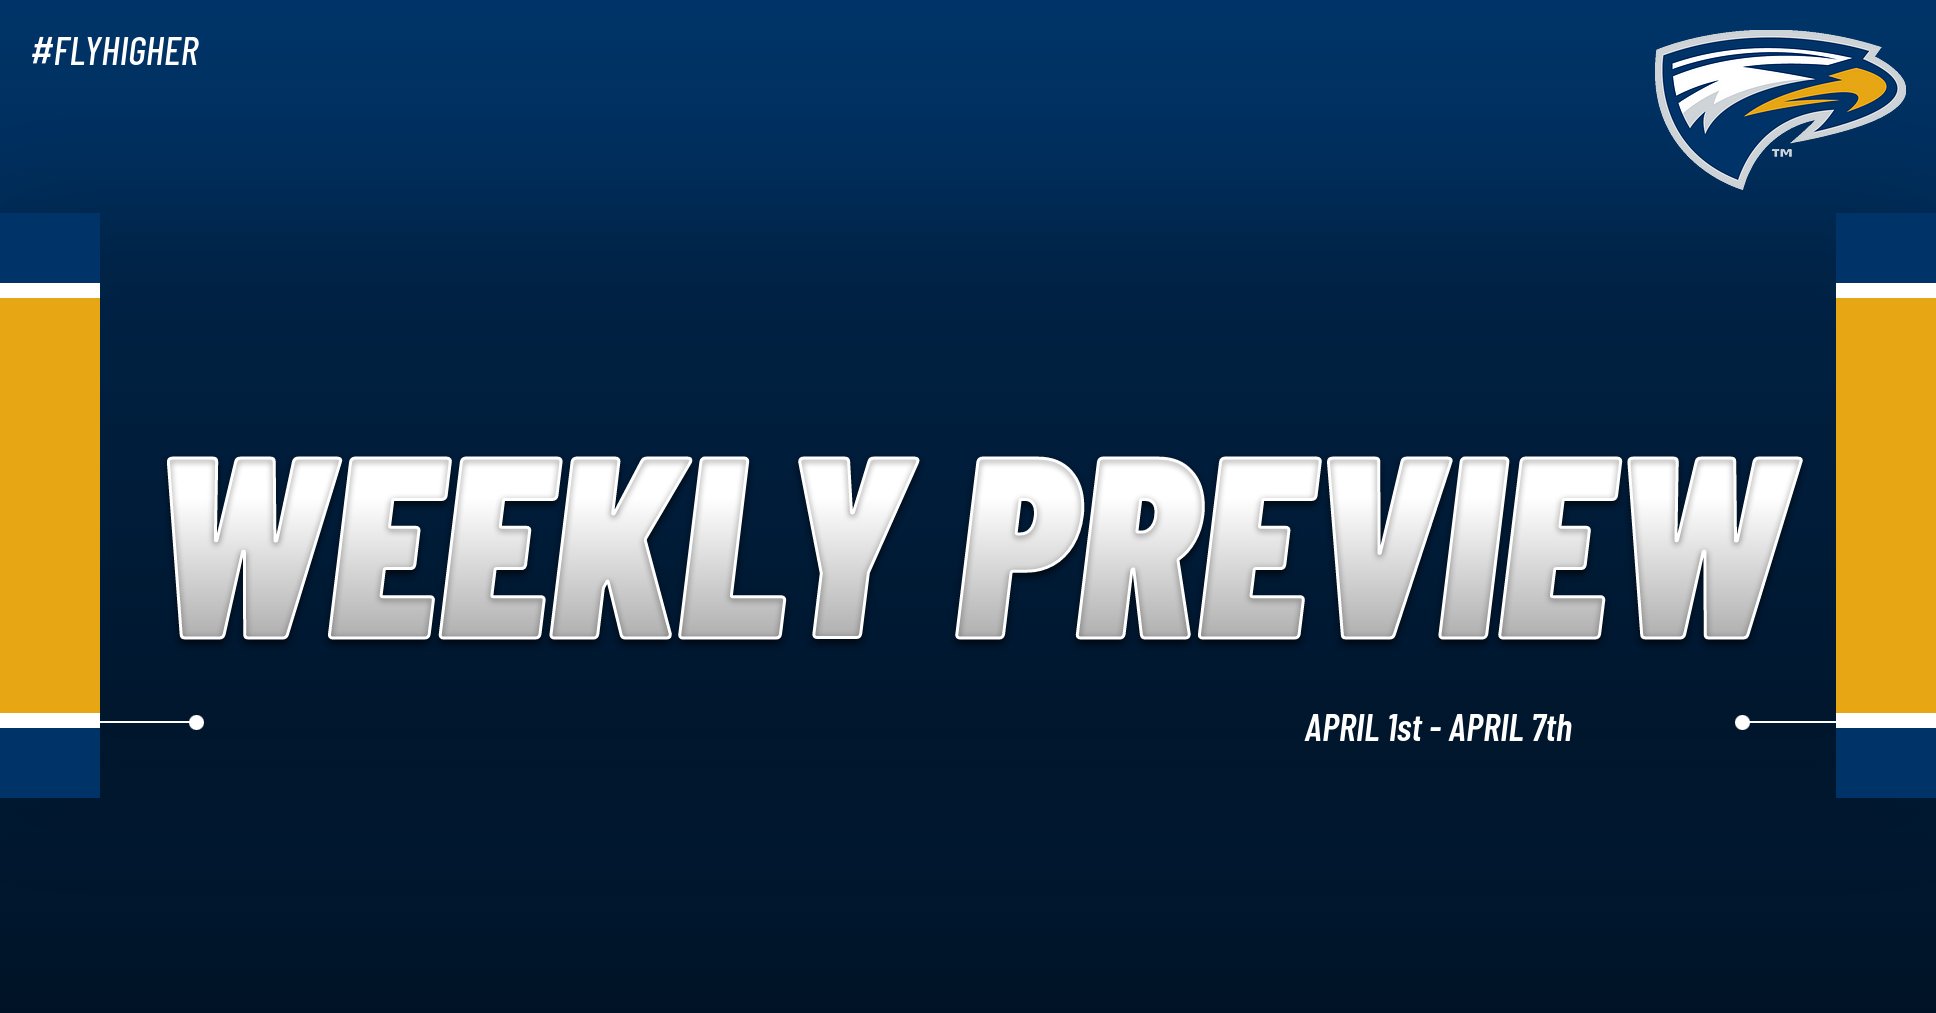 Emory Athletics Weekly Preview: April 1st - April 7th